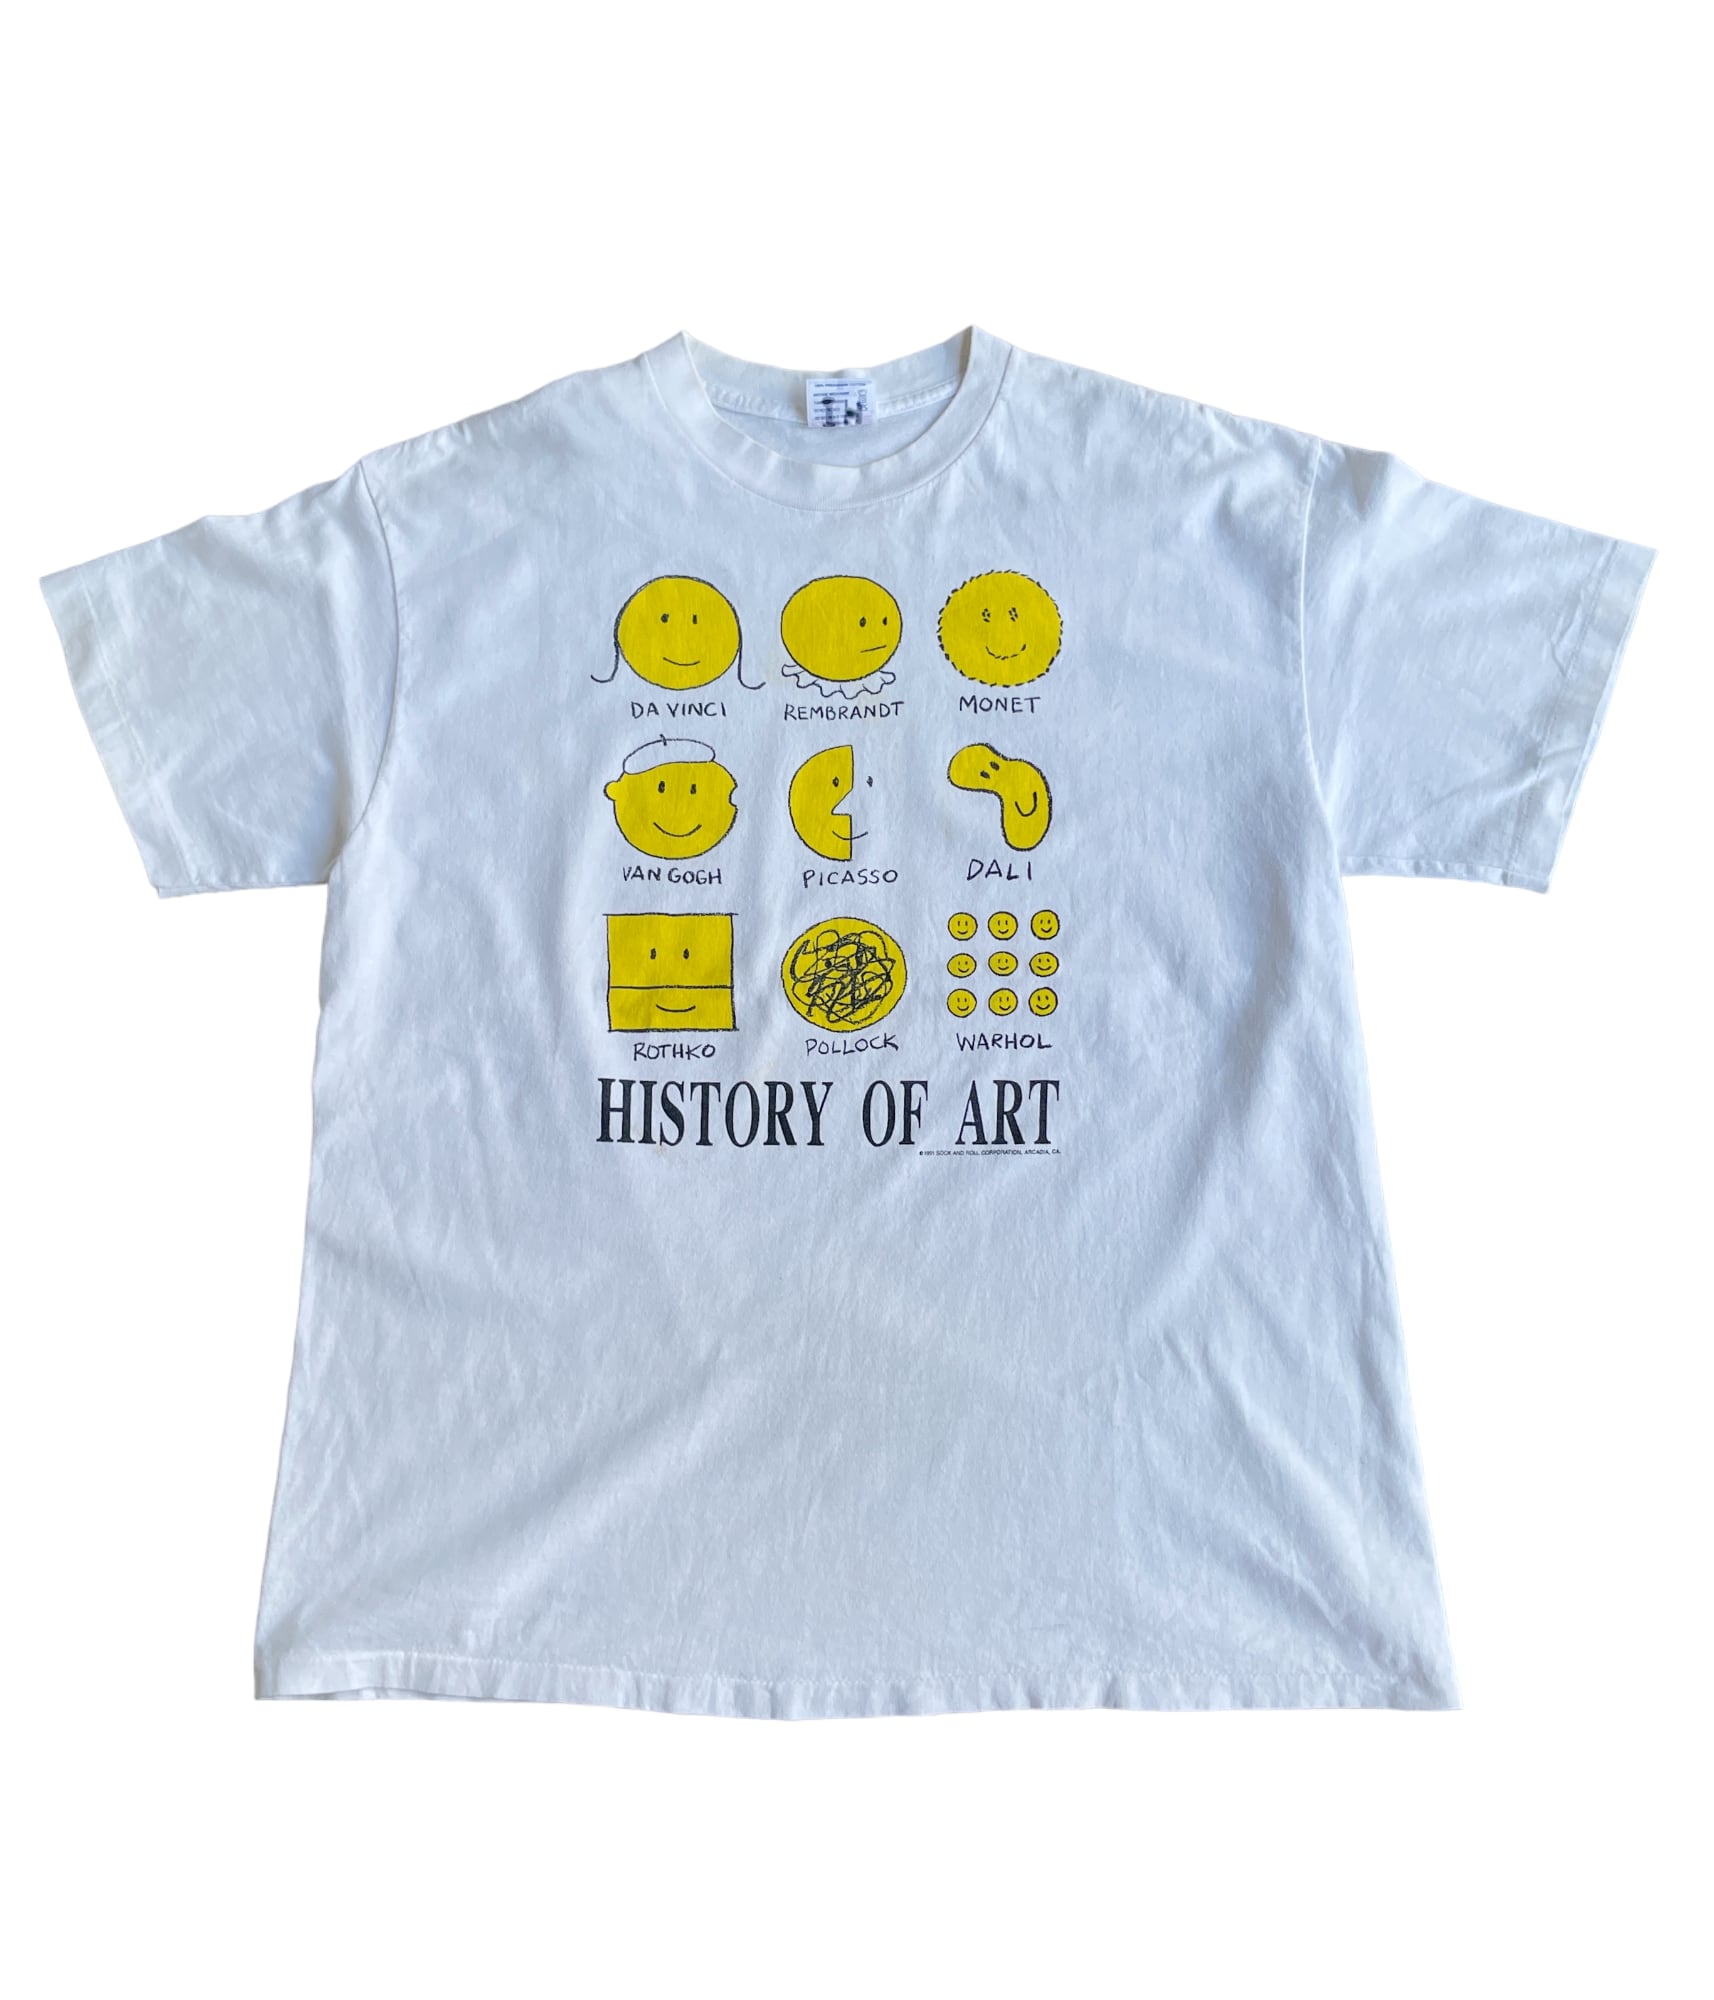 Vintage 90's Art T-shirt -HISTORY OF ART- | BEGGARS BANQUET公式通販サイト 古着・ヴィンテージ